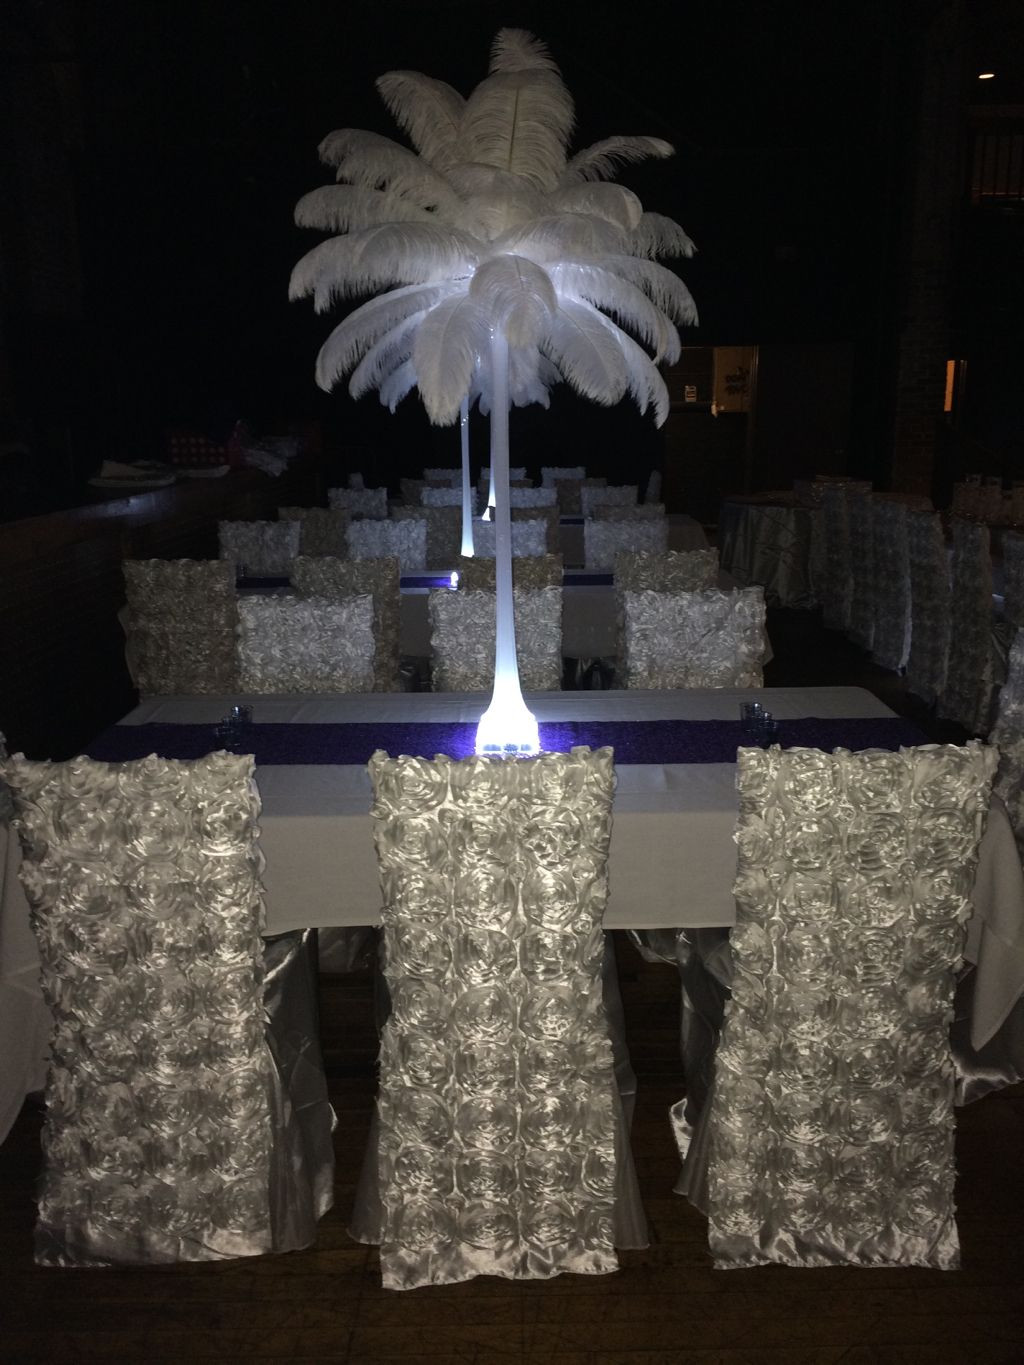 11 Elegant Light Up Vases 2024 free download light up vases of our wedding centerpieces 36 frosted tower vases 40 ostrich pertaining to our wedding centerpieces 36 frosted tower vases 40 ostrich feathers lit up